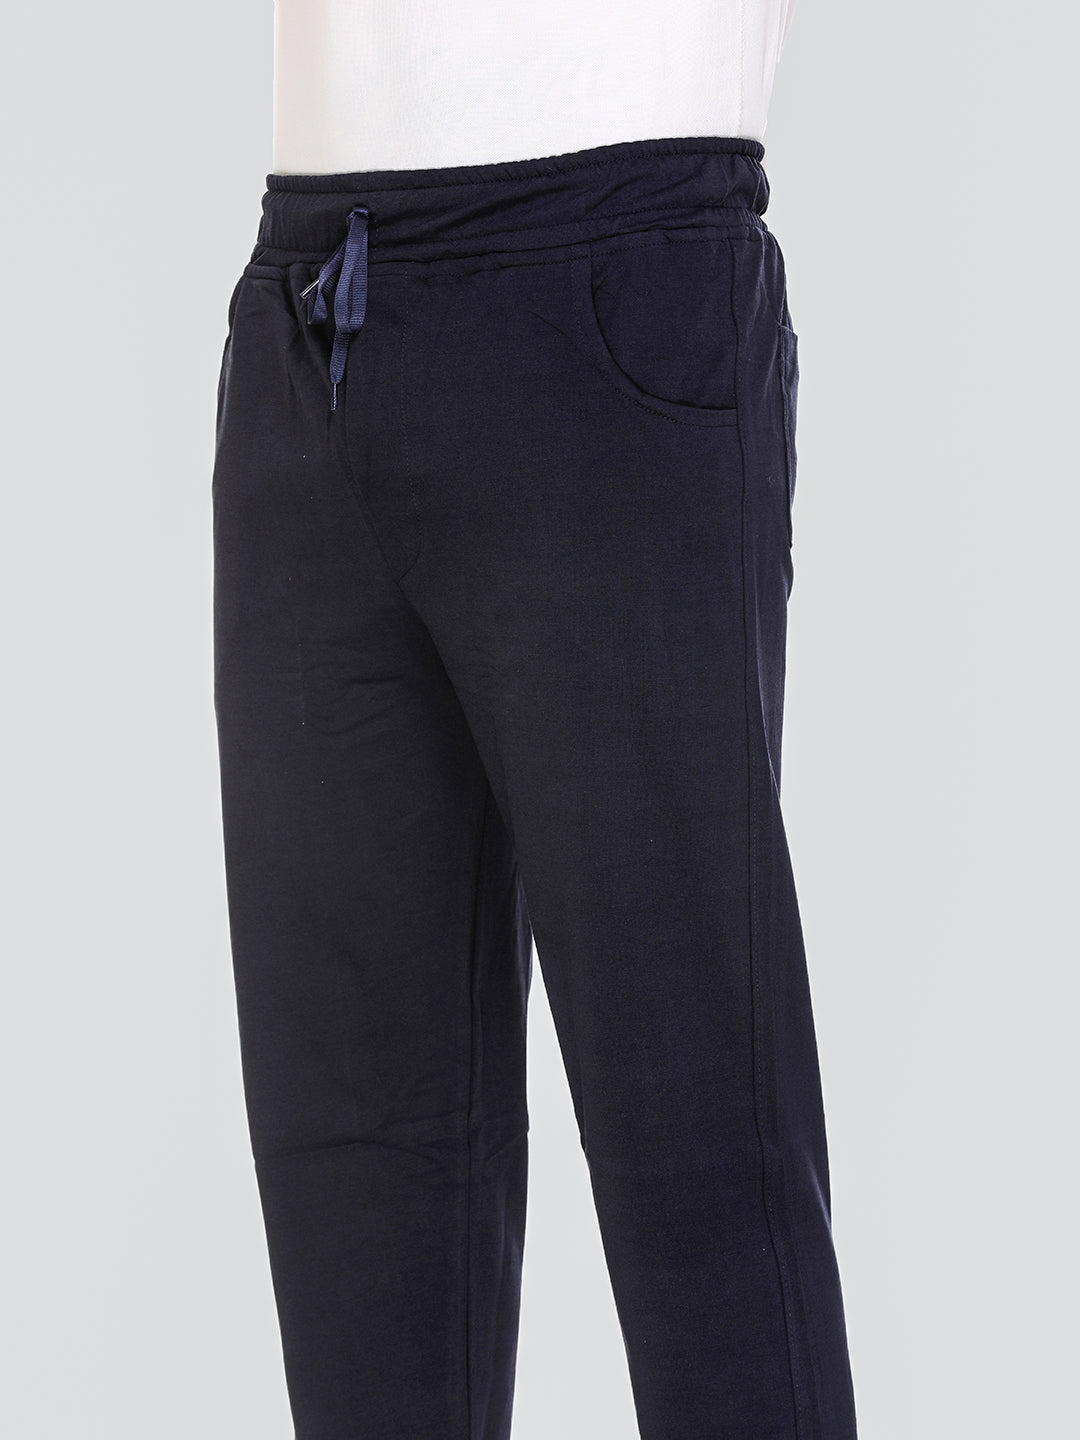 Jinxer Regular Fit Sports Lowers For Men - Navy Blue